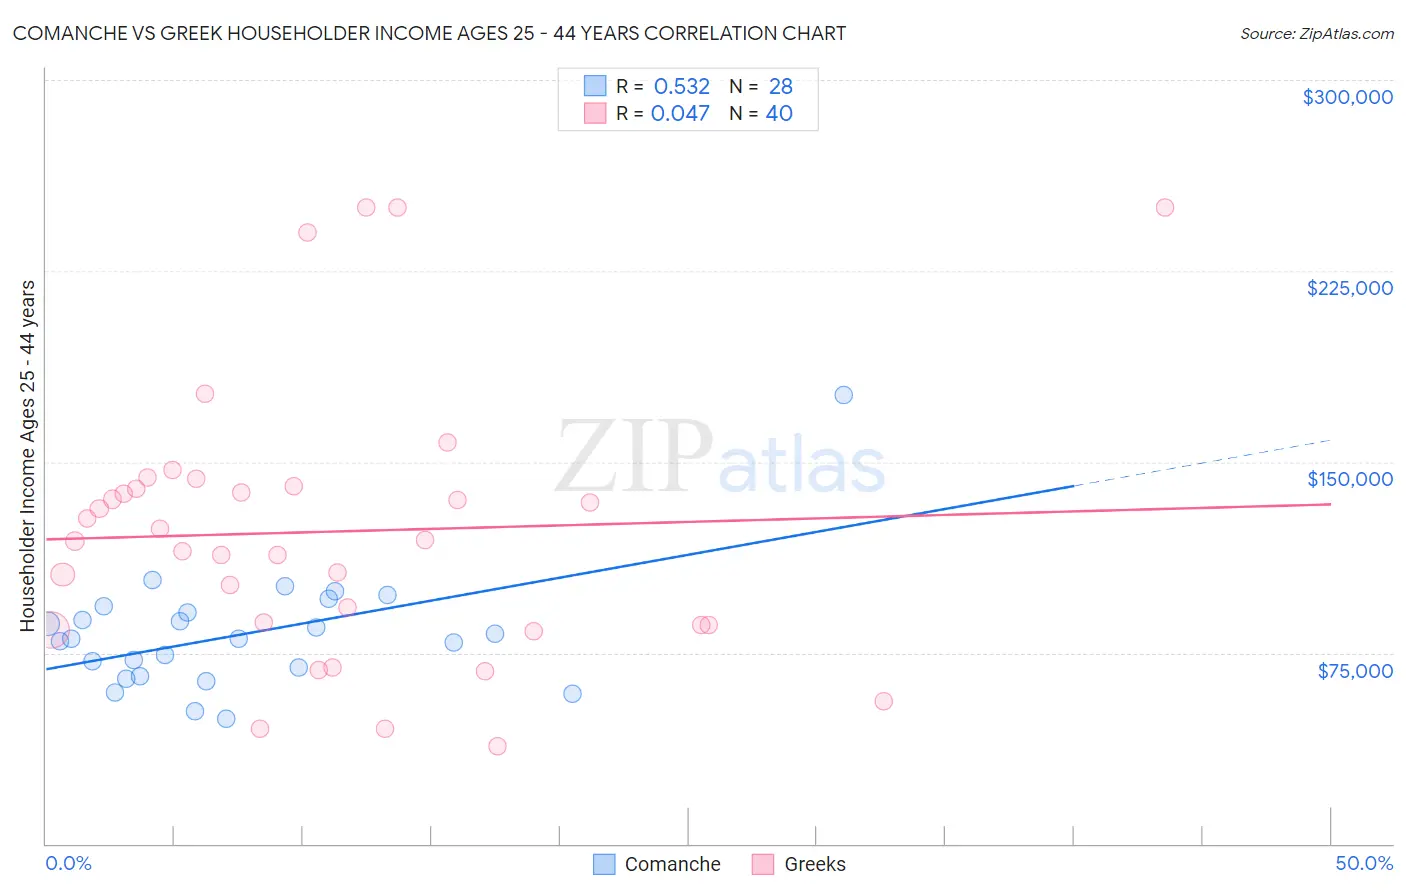 Comanche vs Greek Householder Income Ages 25 - 44 years